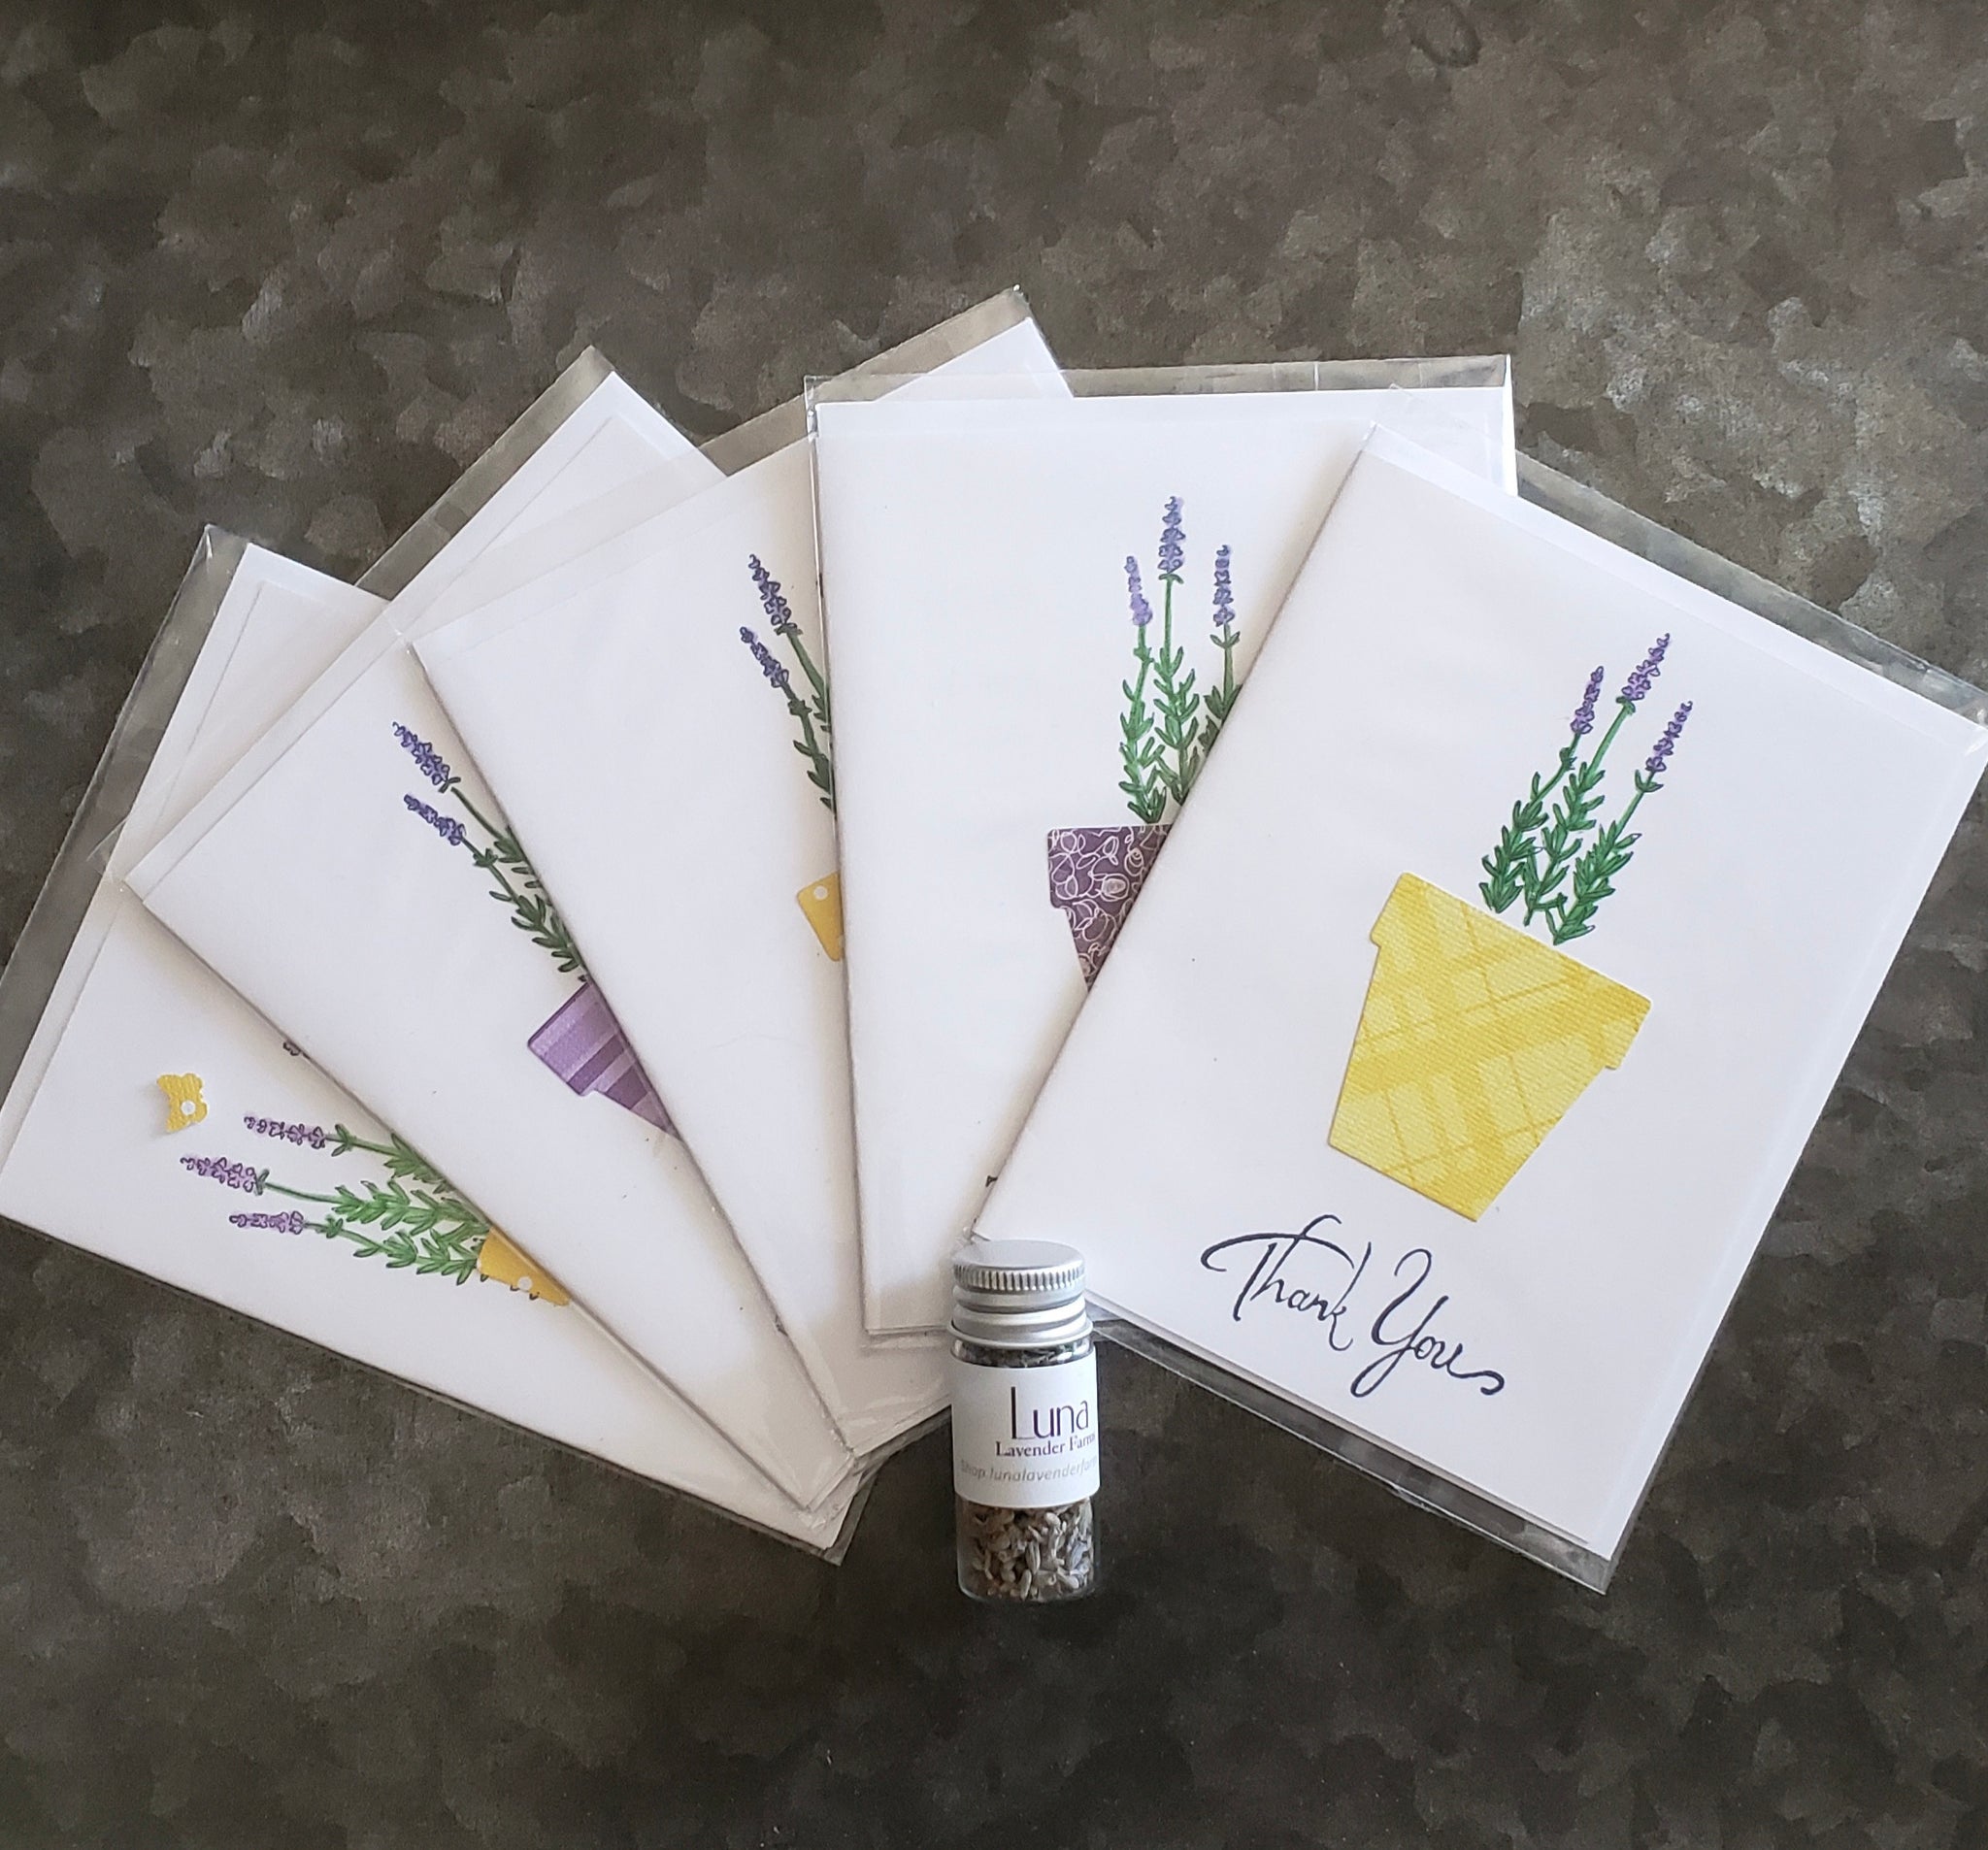 Set of 5 handmade lavender themed greeting cards with vial of lavender to sprinkle inside